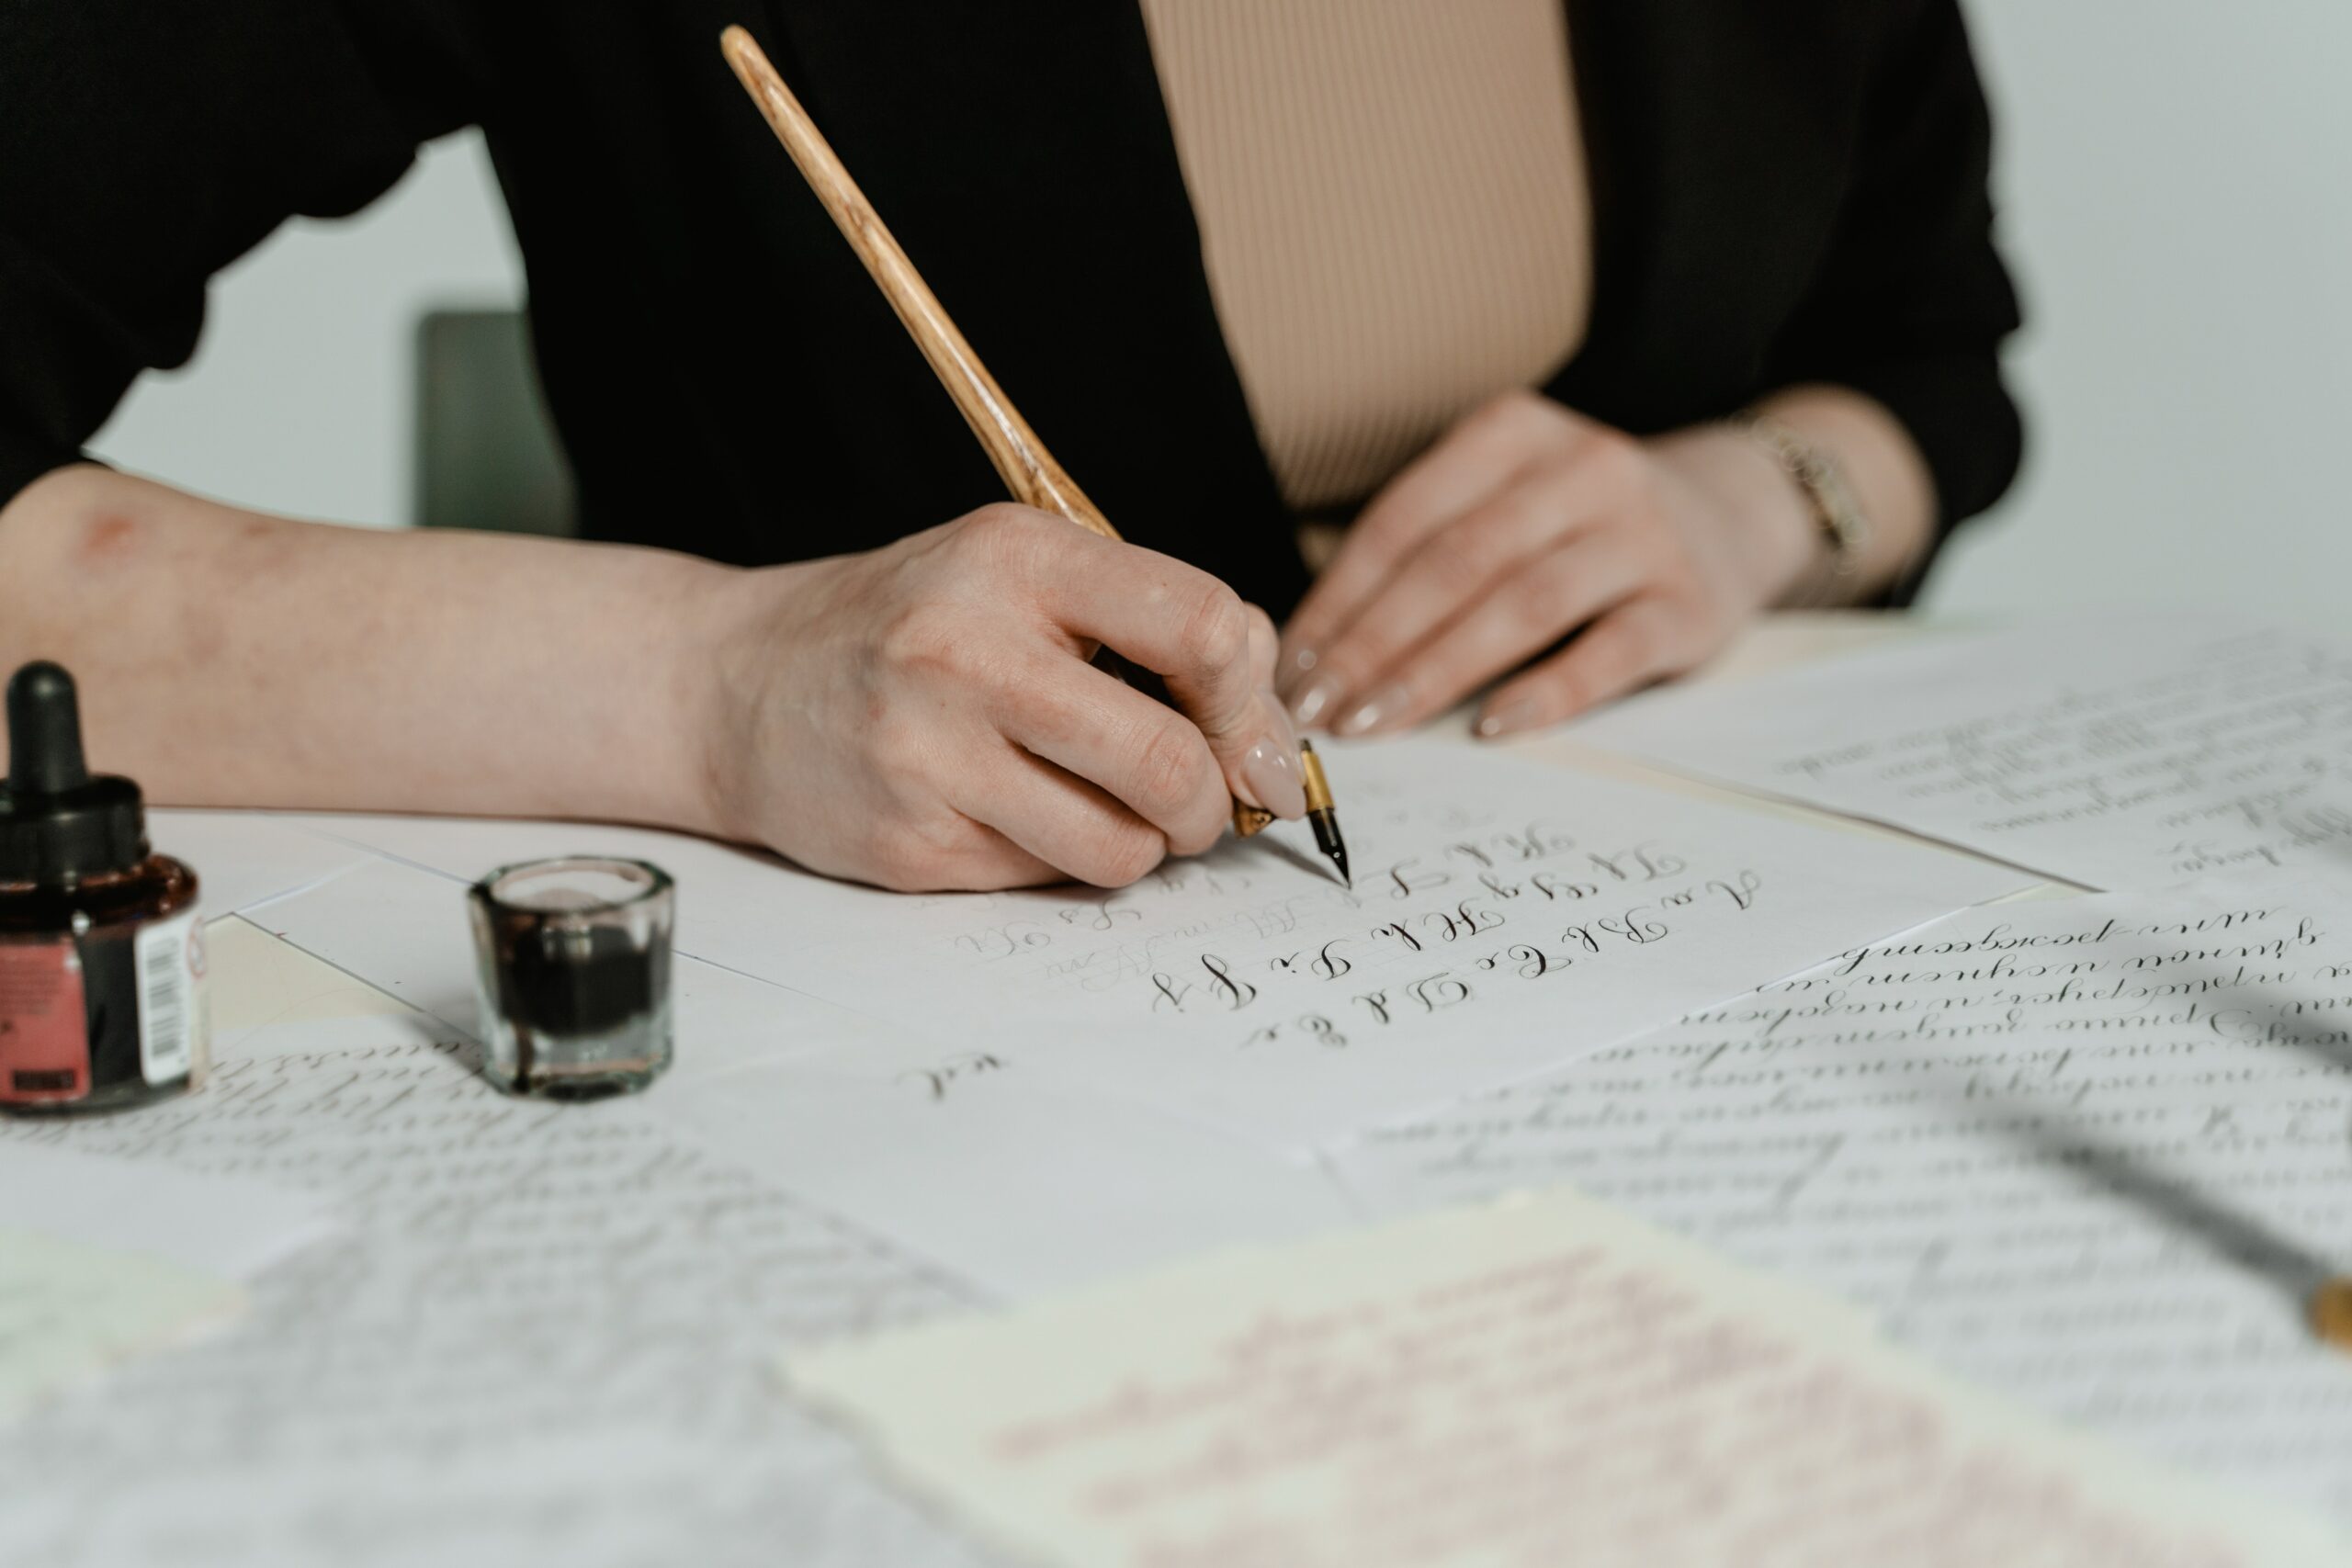 Woman seated at a desk doing calligraphy